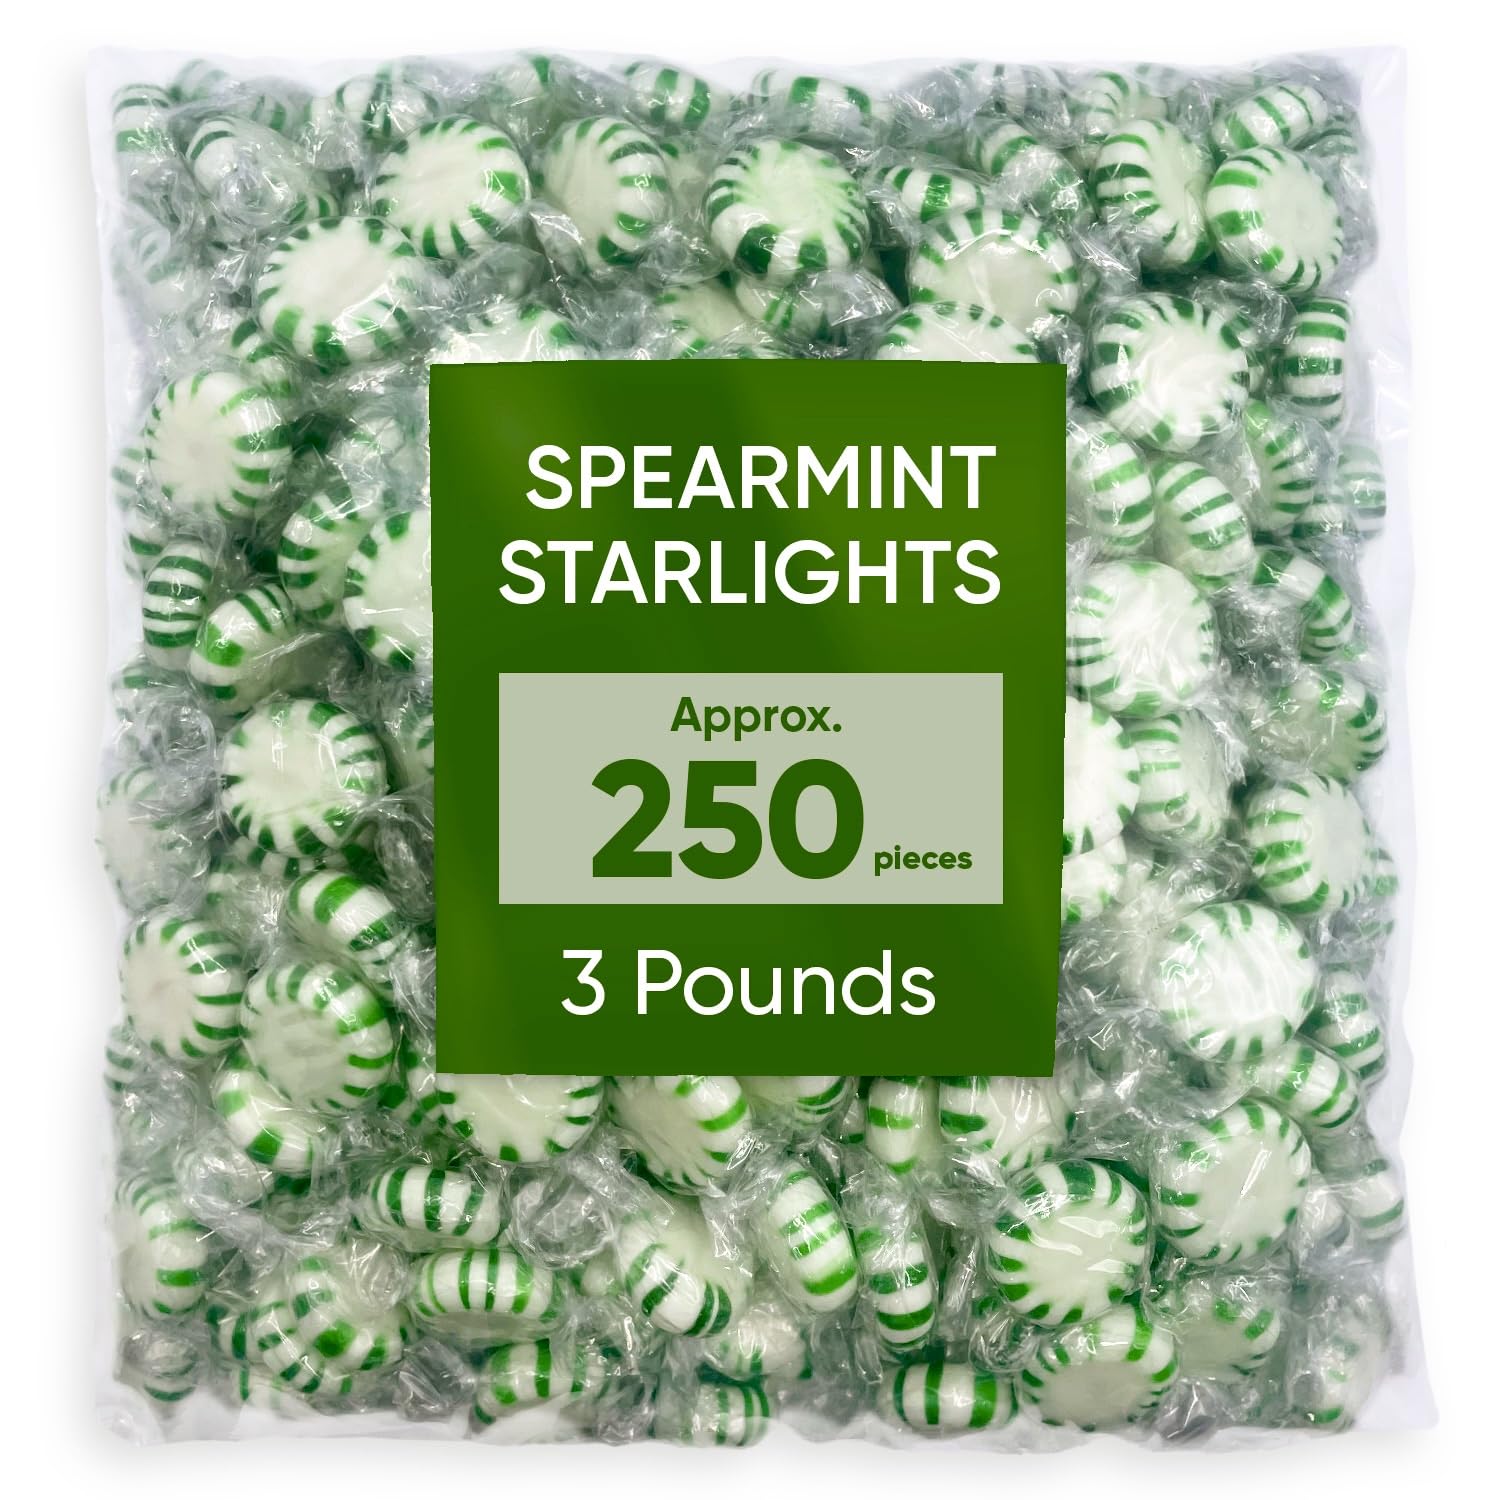 Starlight Spearmint Halloween Candy -3 Pounds Of Bulk Mints Individually Wrapped - Green Spearmint Mints Hard Candy Brea